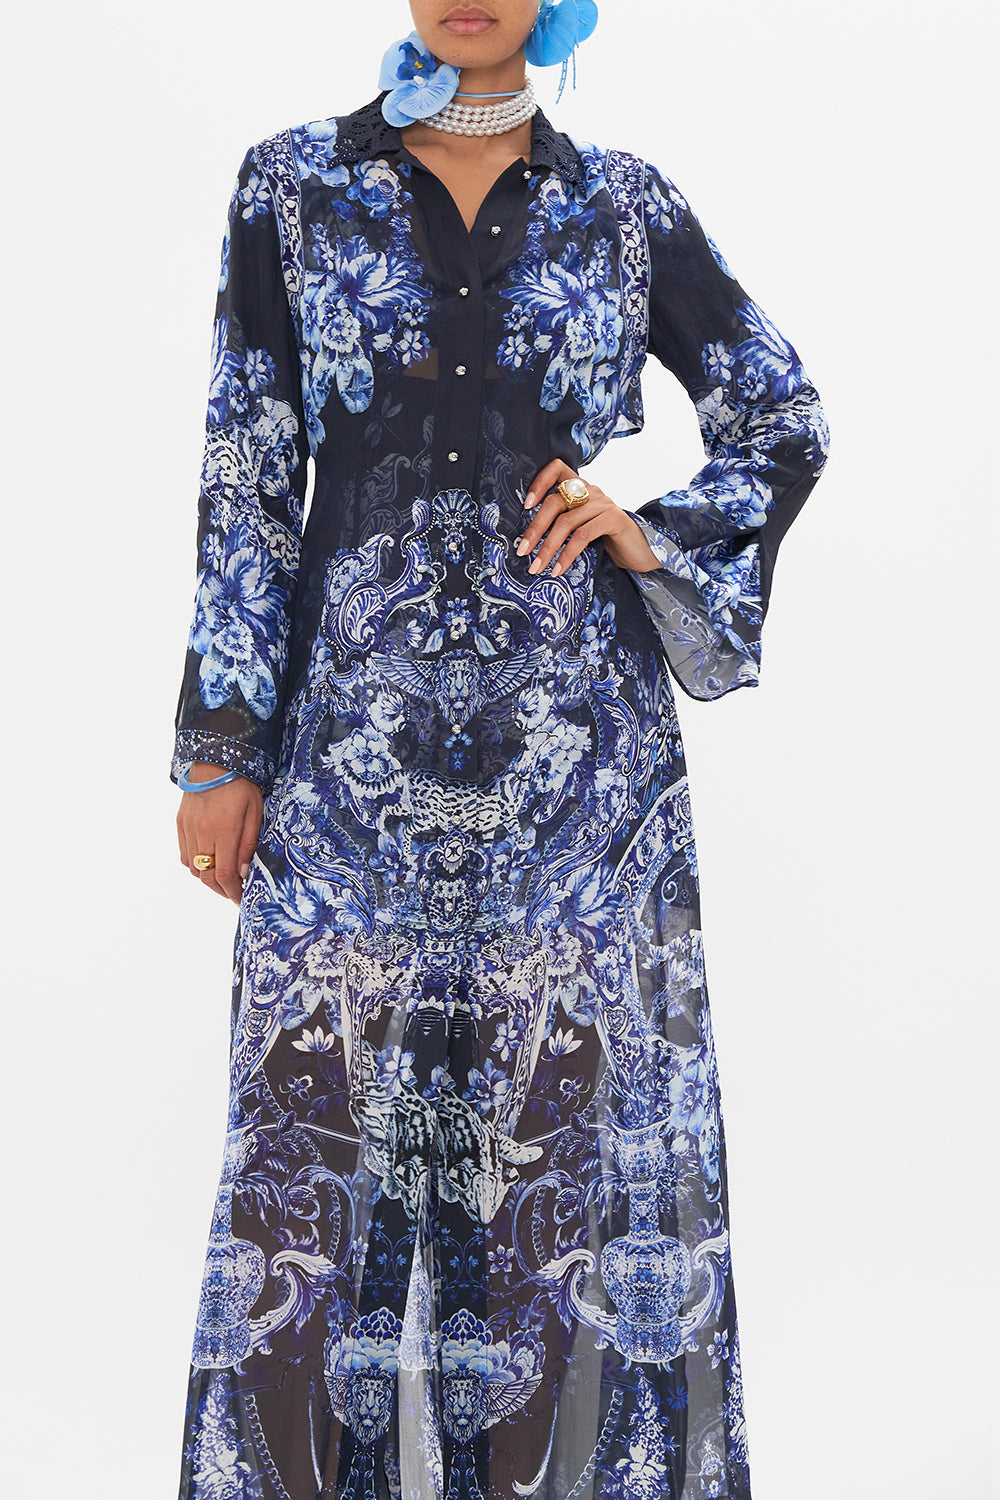 Side view of model wearing CAMILLA silk trench in Delft Dynasty print